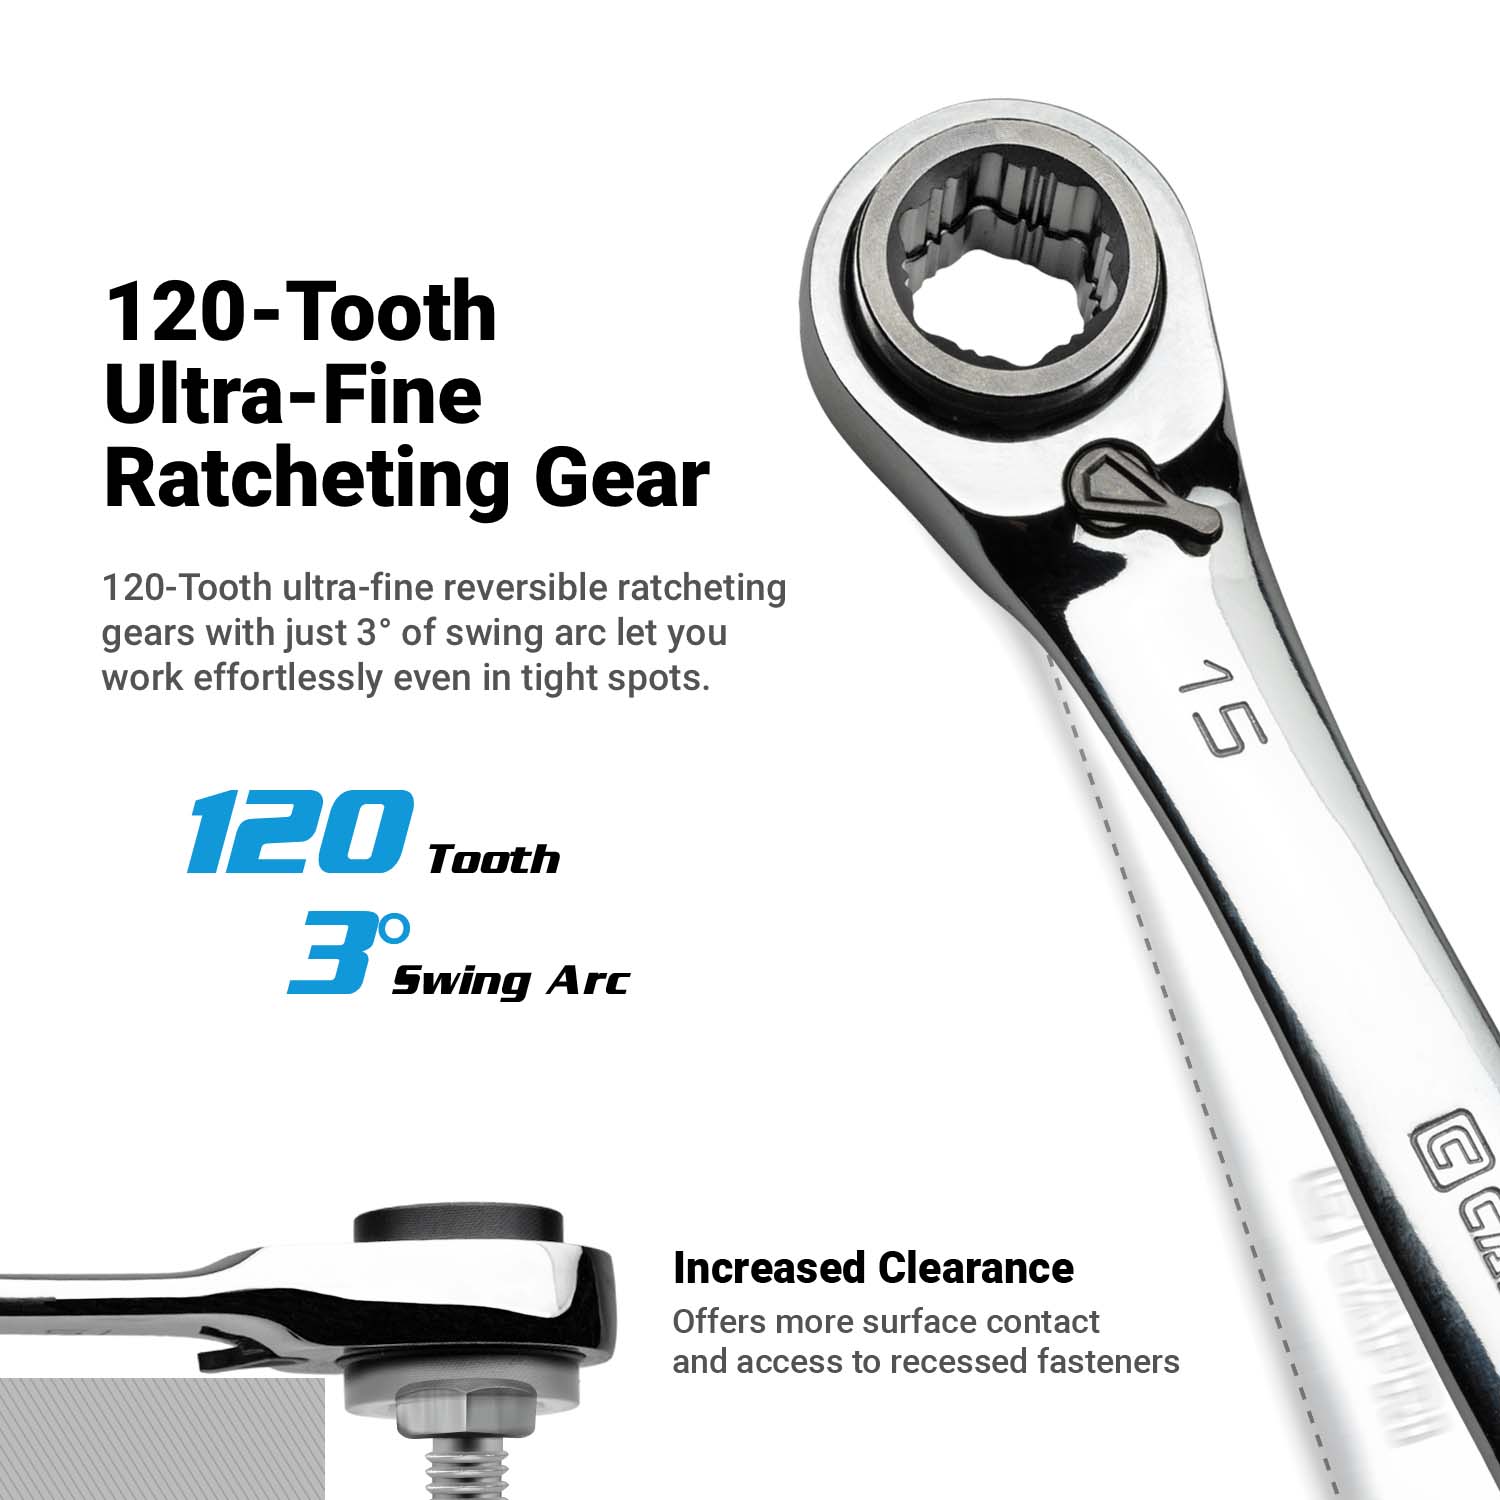 Capri Tools 4-in-1 120-Tooth Box End Reversible Ratcheting Wrench, 8, 10, 12, 13 mm, Metric